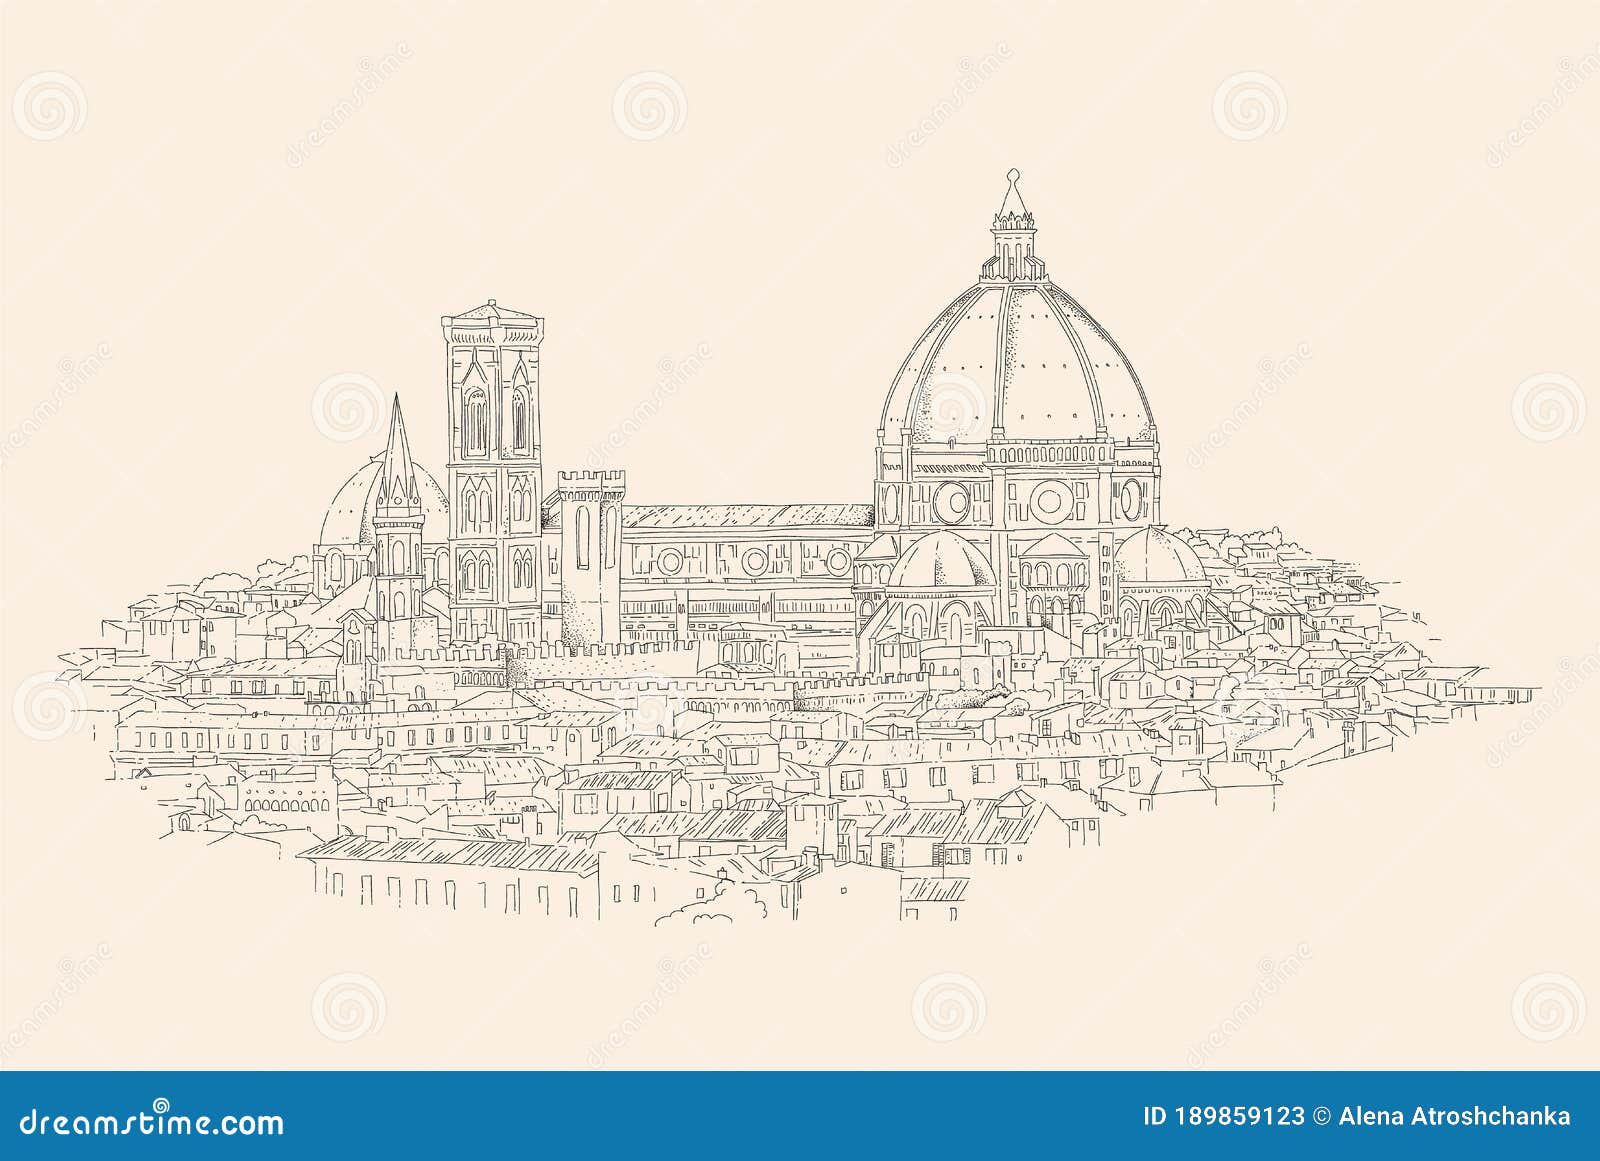 florence, italy cityscape with dome and old quarters